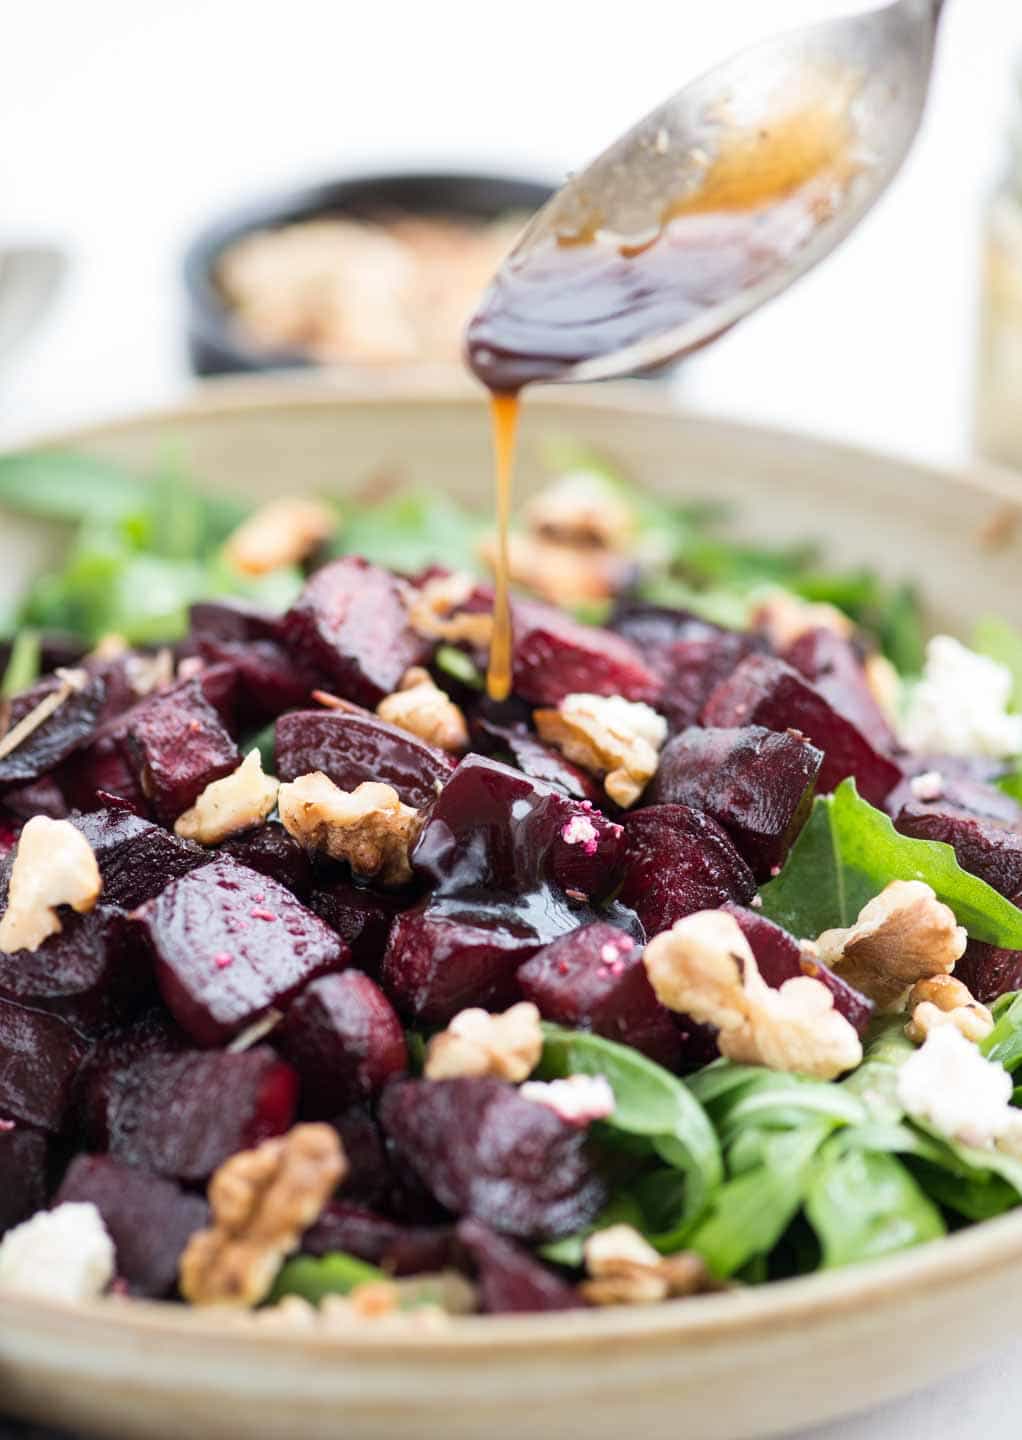 Closeup of Balsamic dressing poured over beetroot arugula salad with walnuts